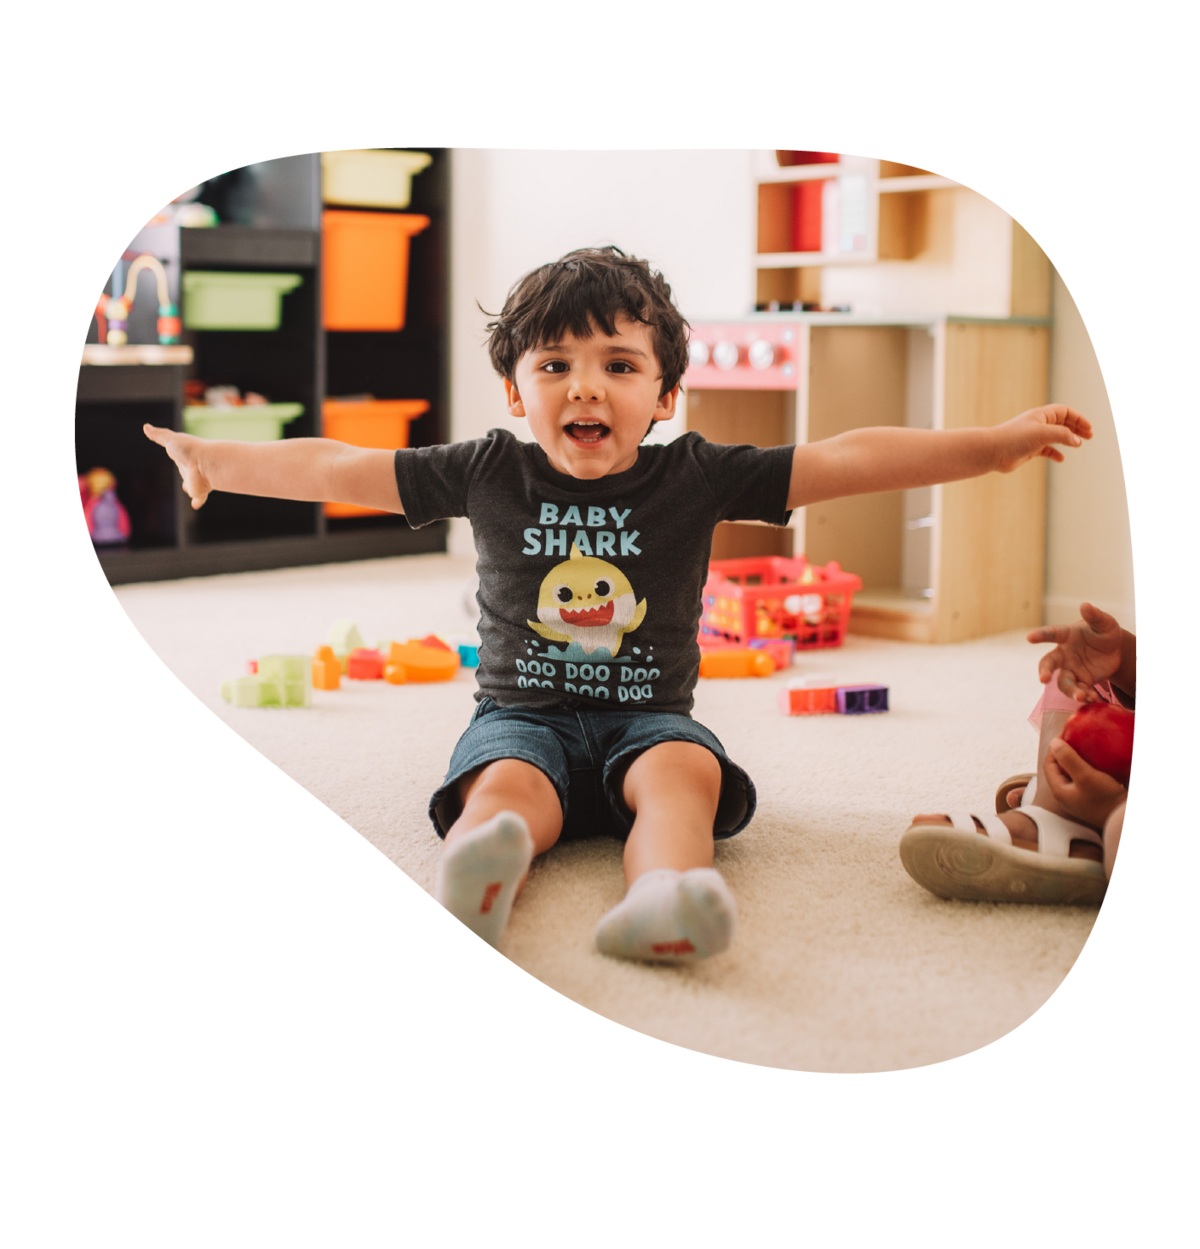 A toddler laughing and having fun at at Books & Blankets childcare & early learning in Elk Grove, CA.